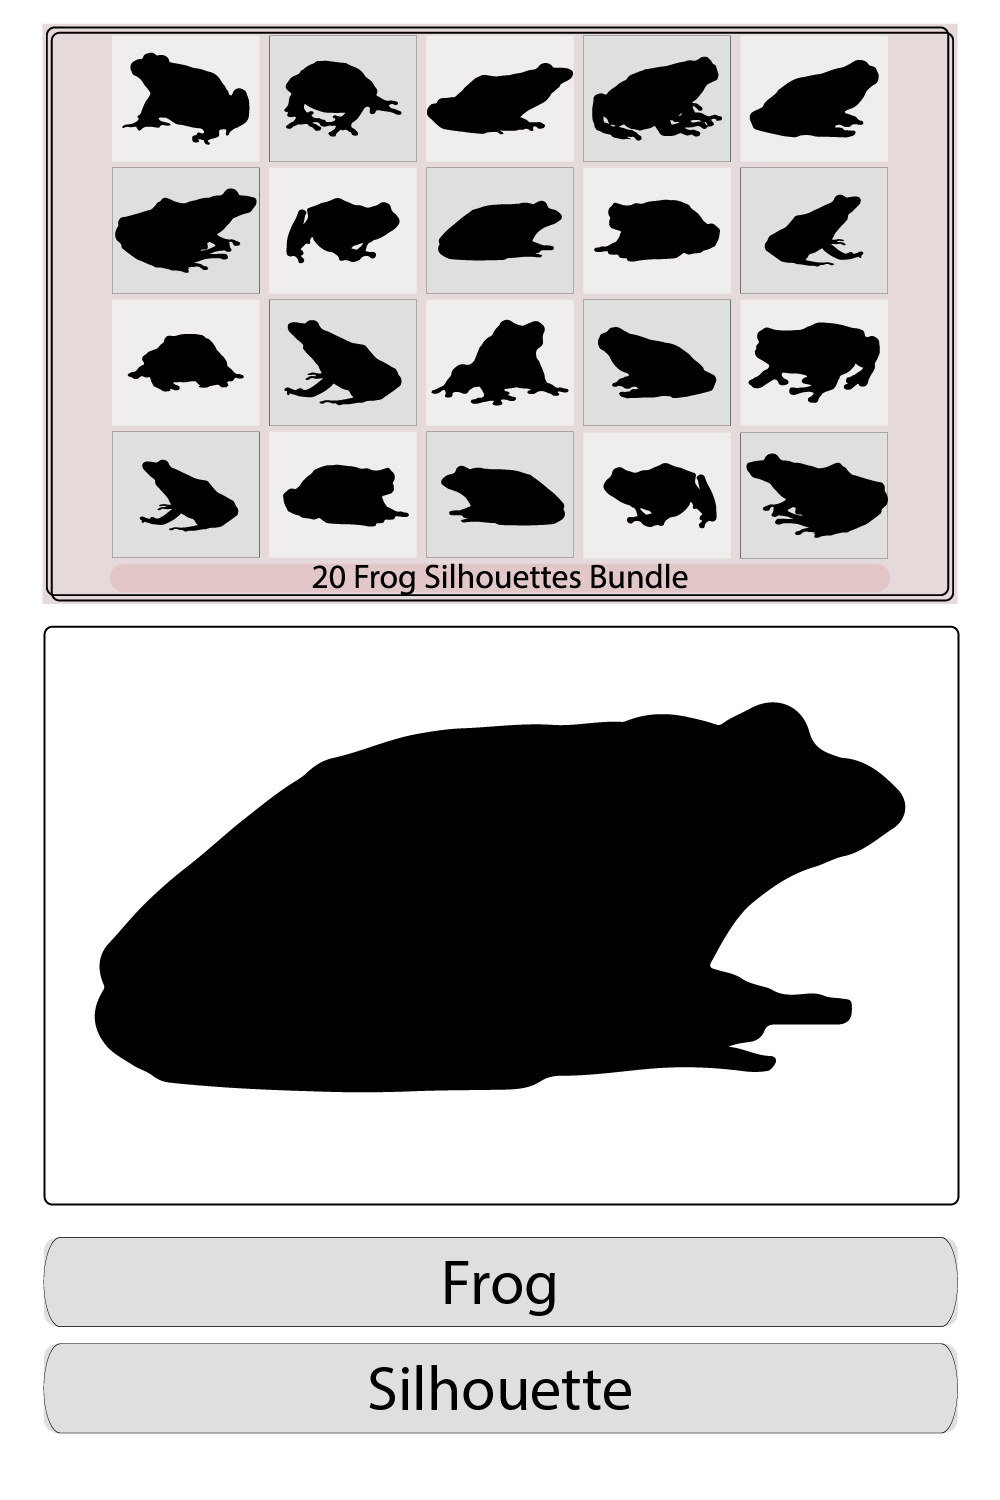 Frog Silhouette,Silhouettes frog-vector,Tree frog silhouette vector,Vector hand drawn frog silhouette pinterest preview image.